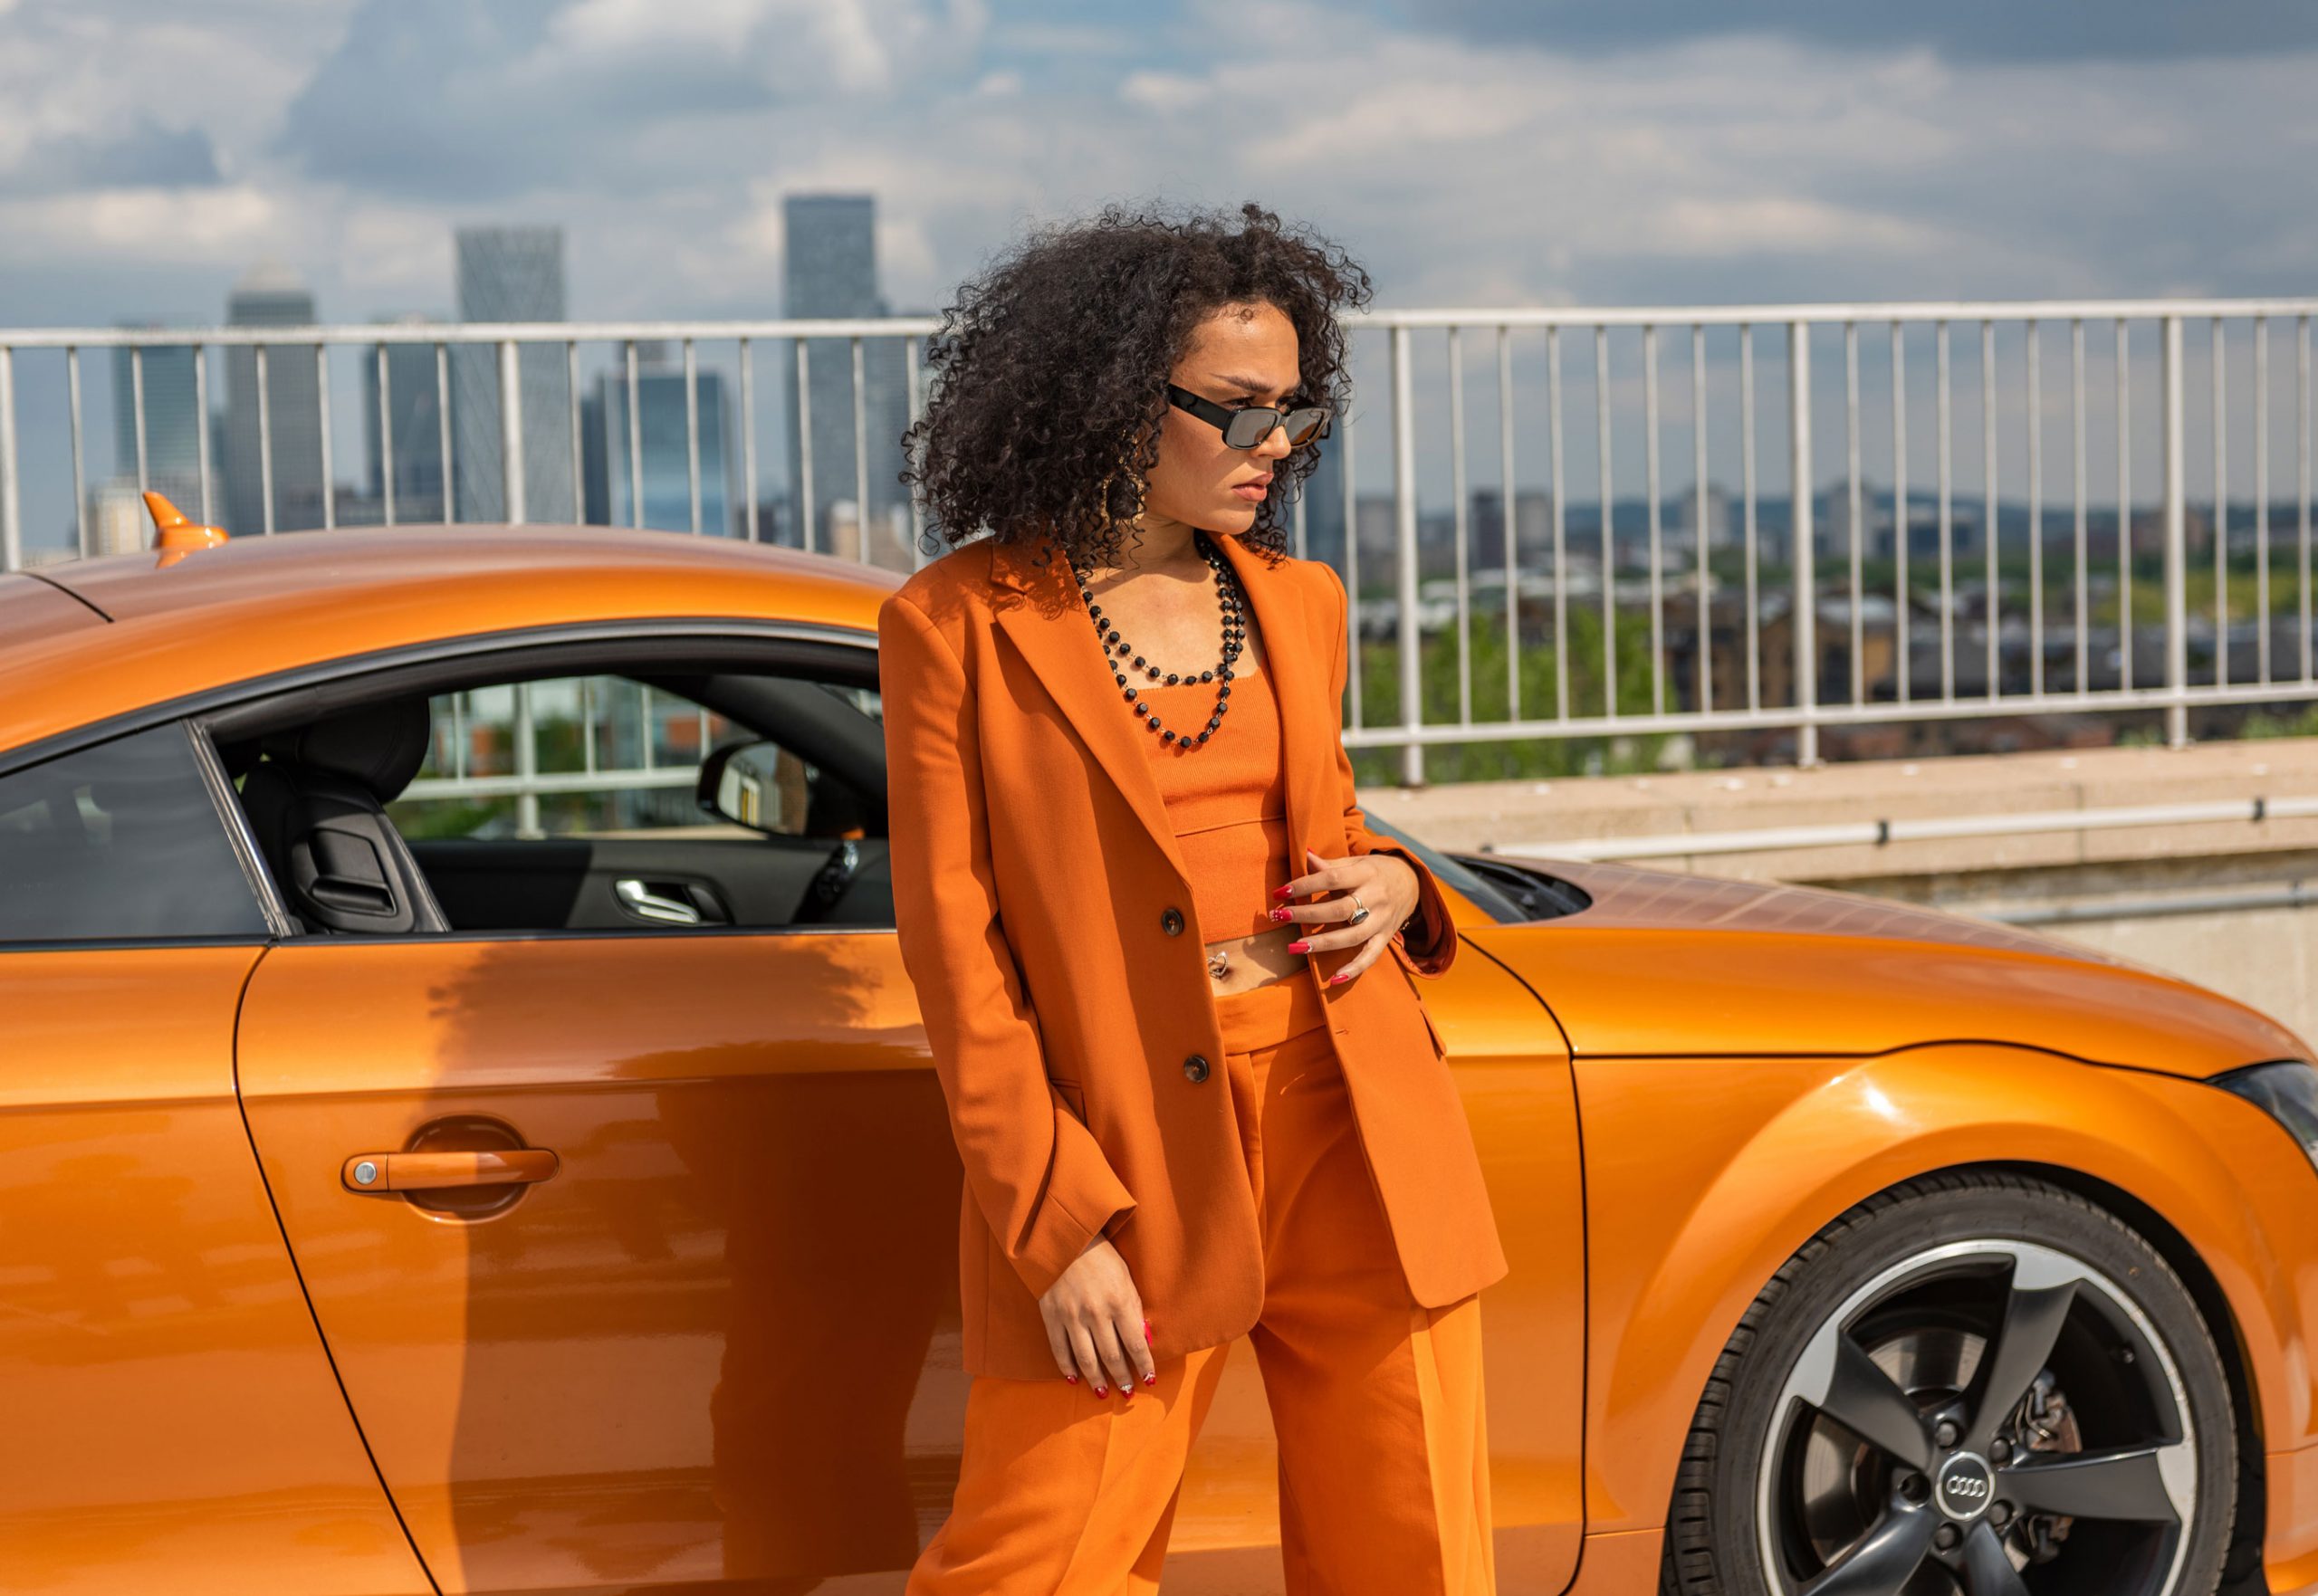 A fashion model wears an orange suit and sunglasses, posing in front of an orange sports Audi TT car. Shot for an ad campaign for the social car hiring platform Turo, this image was captured on a rooftop multistorey car park overlooking London.